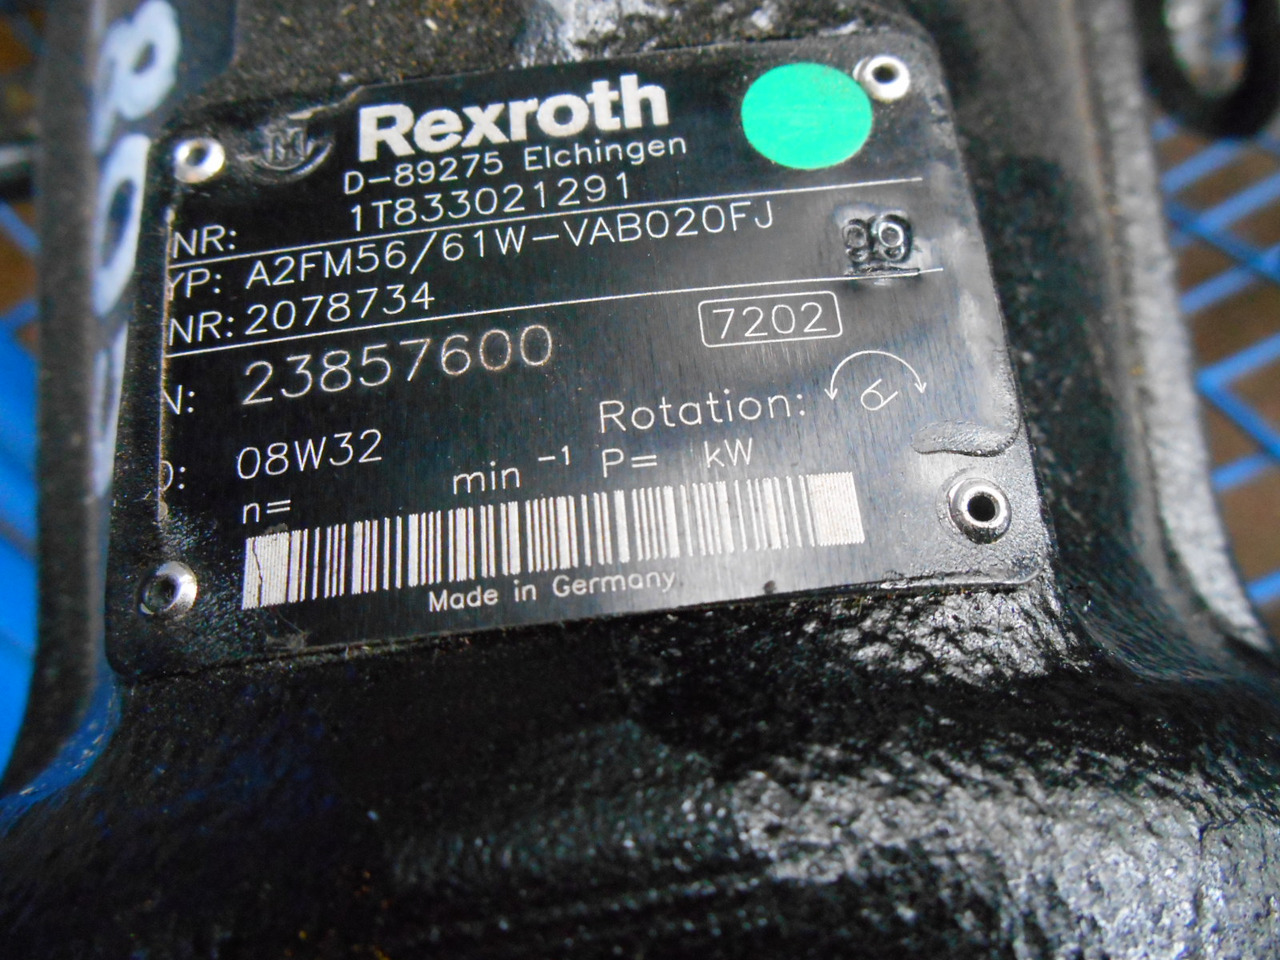 Rexroth A2FM56/61W-VAB020FJ - - Swing motor for Construction machinery: picture 4